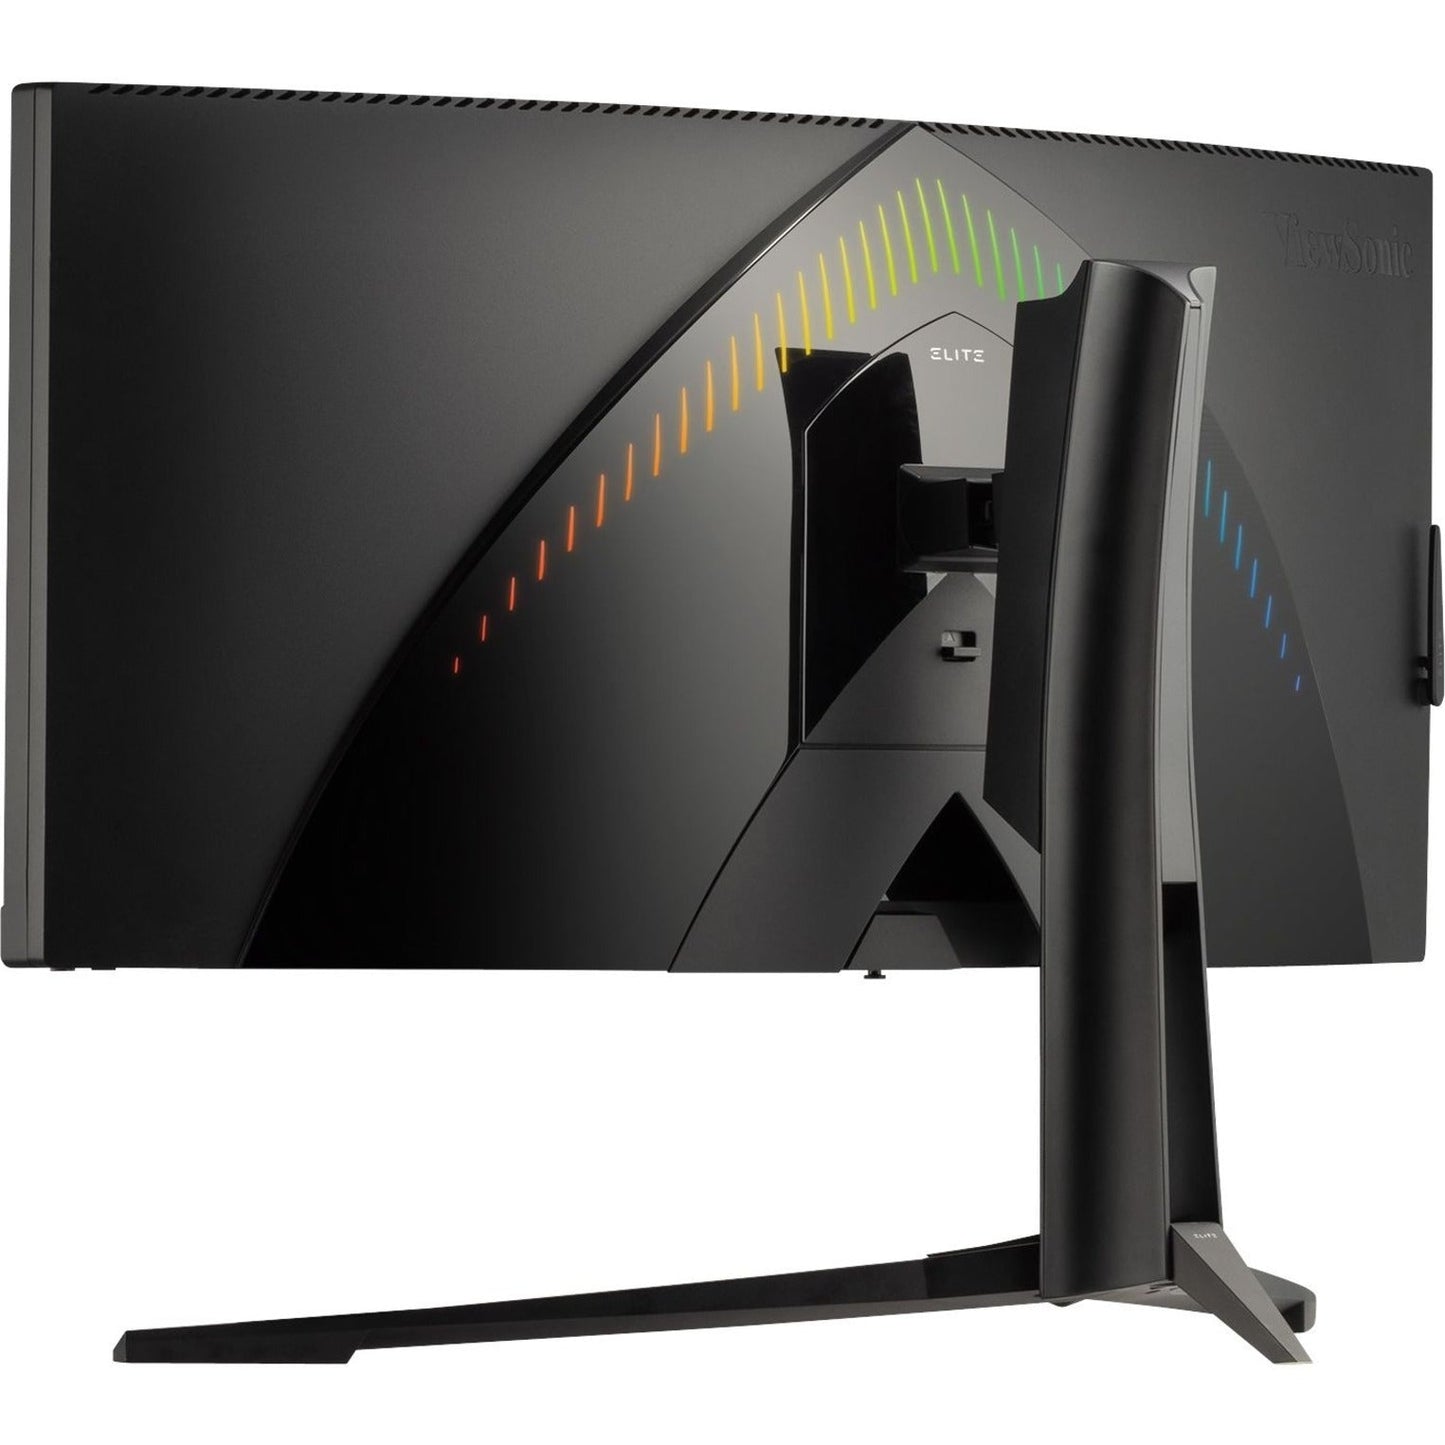 ViewSonic ELITE XG340C-2K 34 Inch 1440p Ultra-Wide QHD Curved Gaming Monitor with 1ms 180Hz AMD FreeSync Premium Pro HDR 400 HDMI 2.1 DisplayPort and USB C for Esports